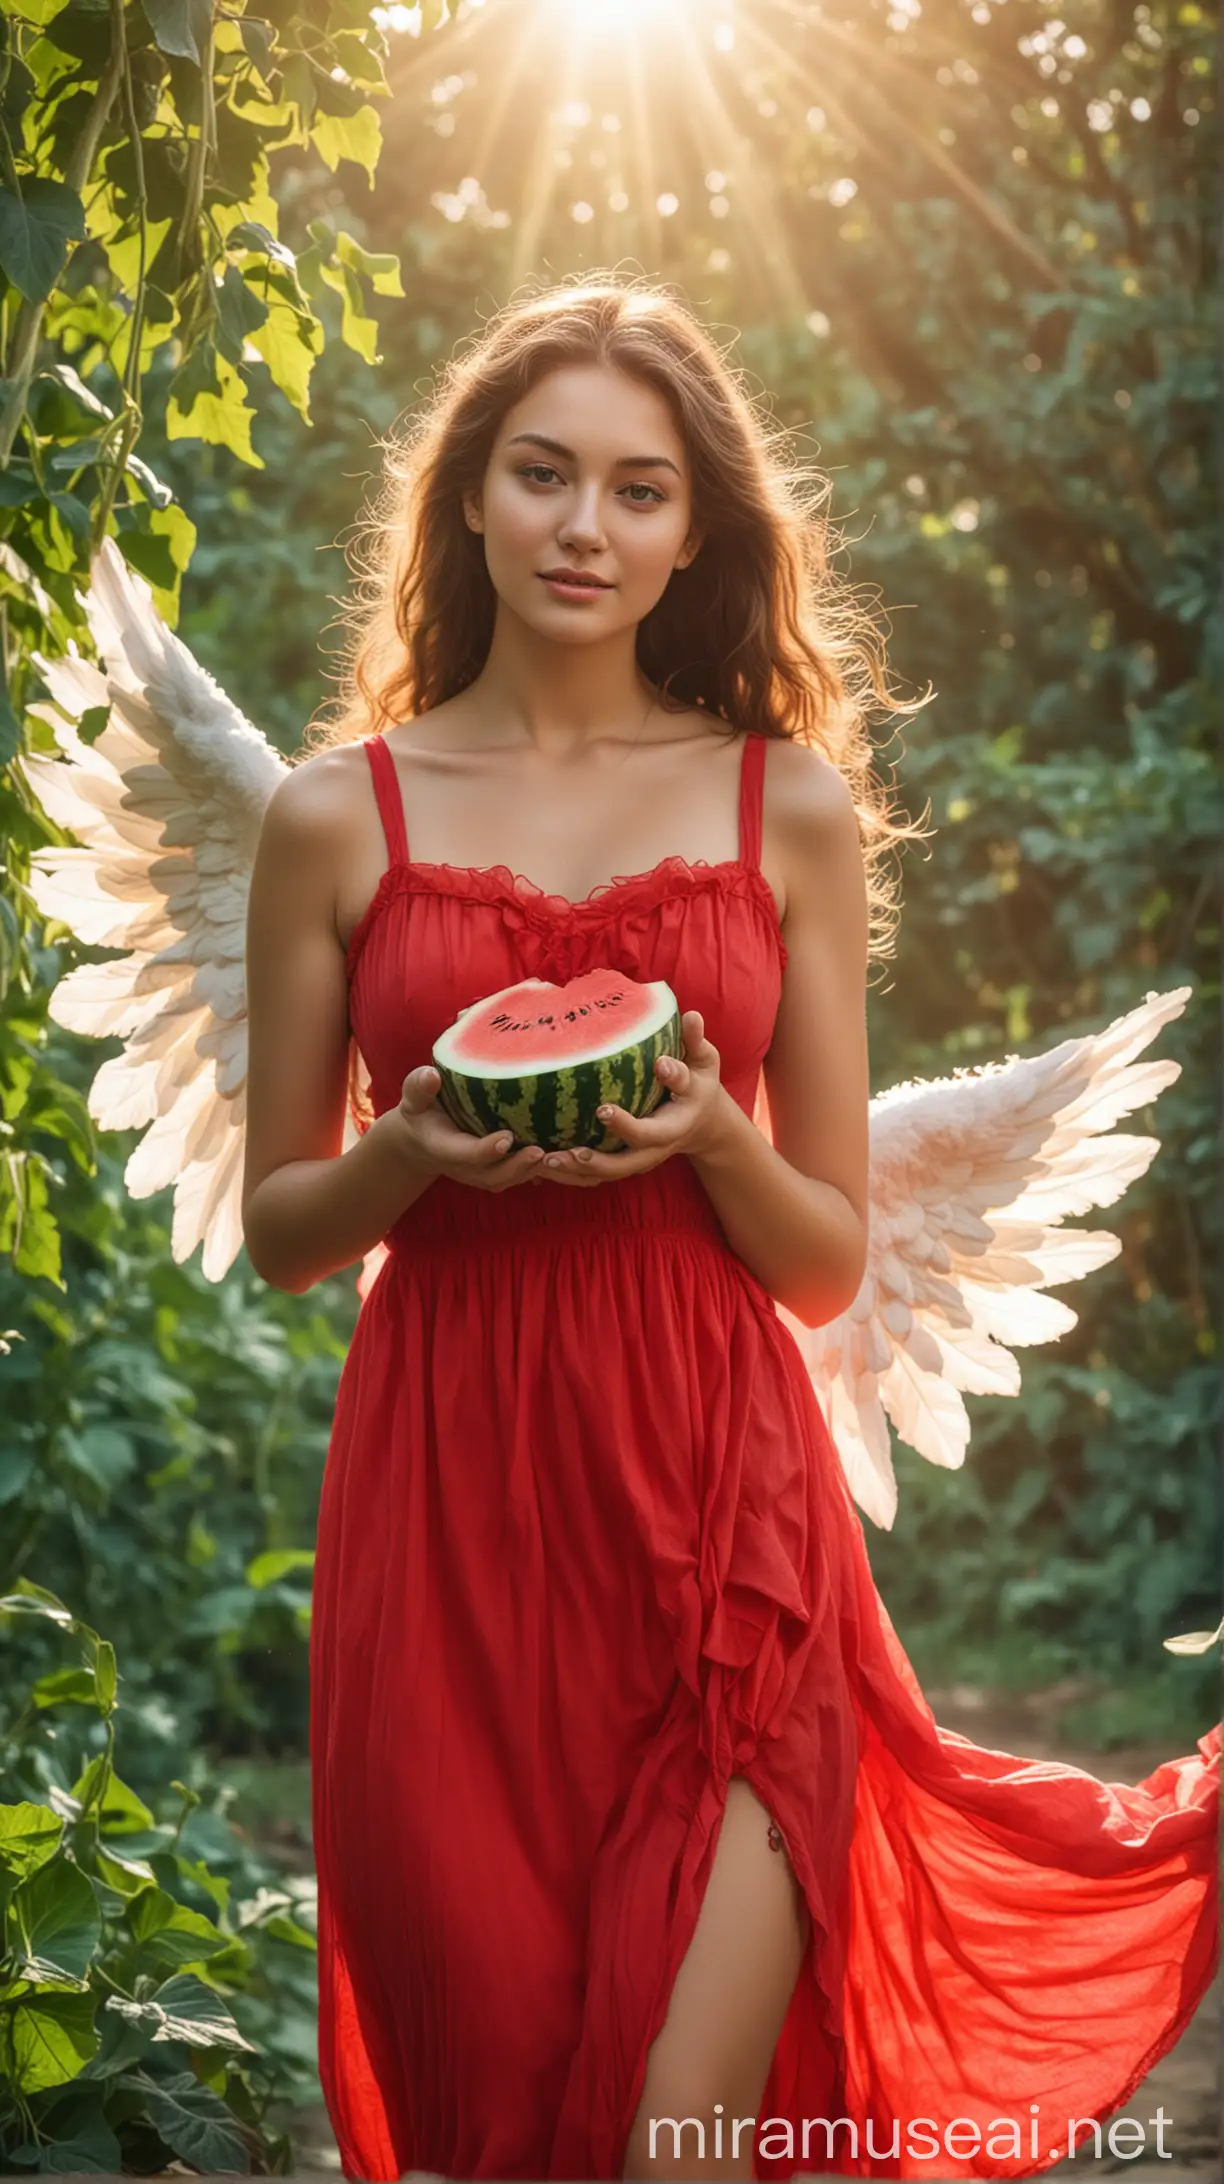 Angel Women Holding Watermelon in Red Dress Natural Background 4k HDR Photography